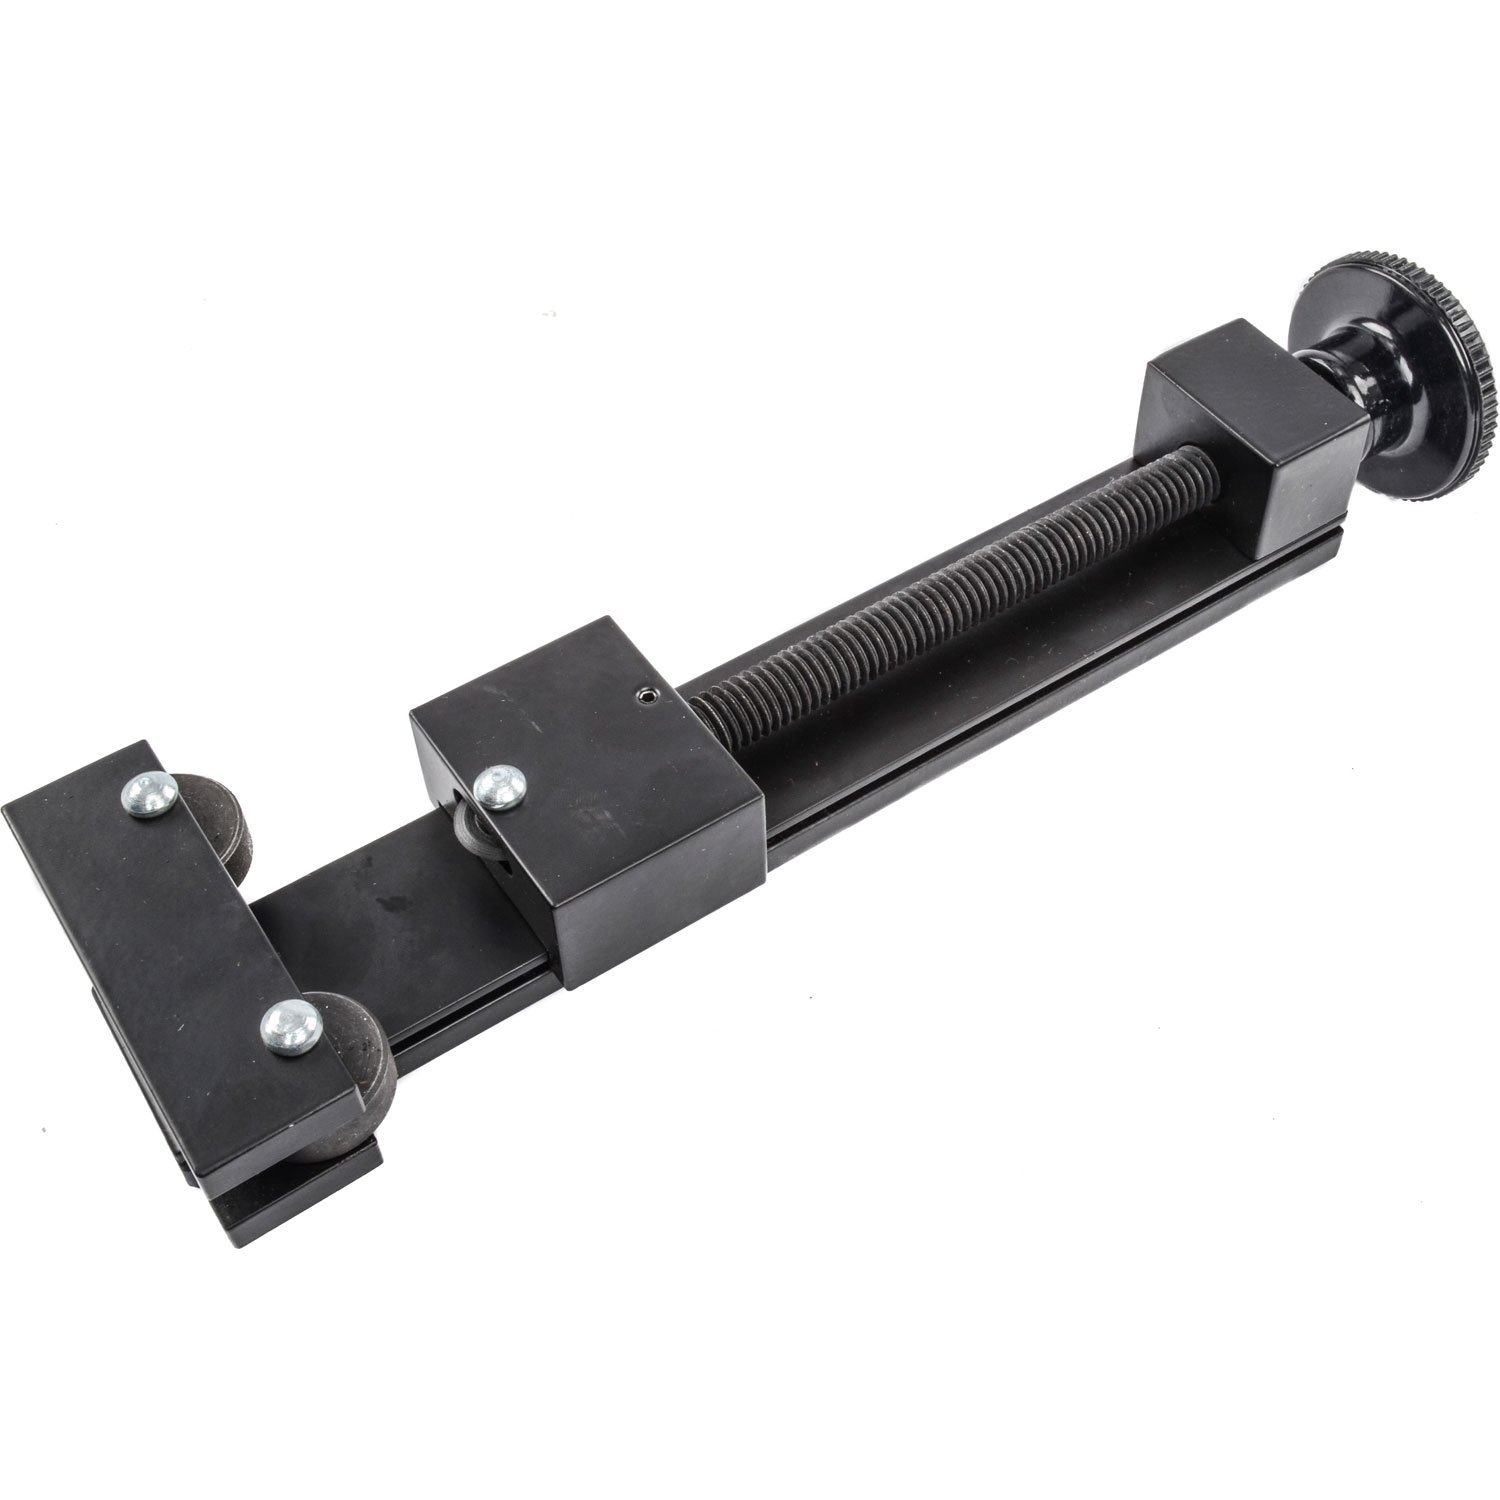 Oil Filter Cutting Tool Fits Filters [Up To 5 1/2 in. in Diameter]